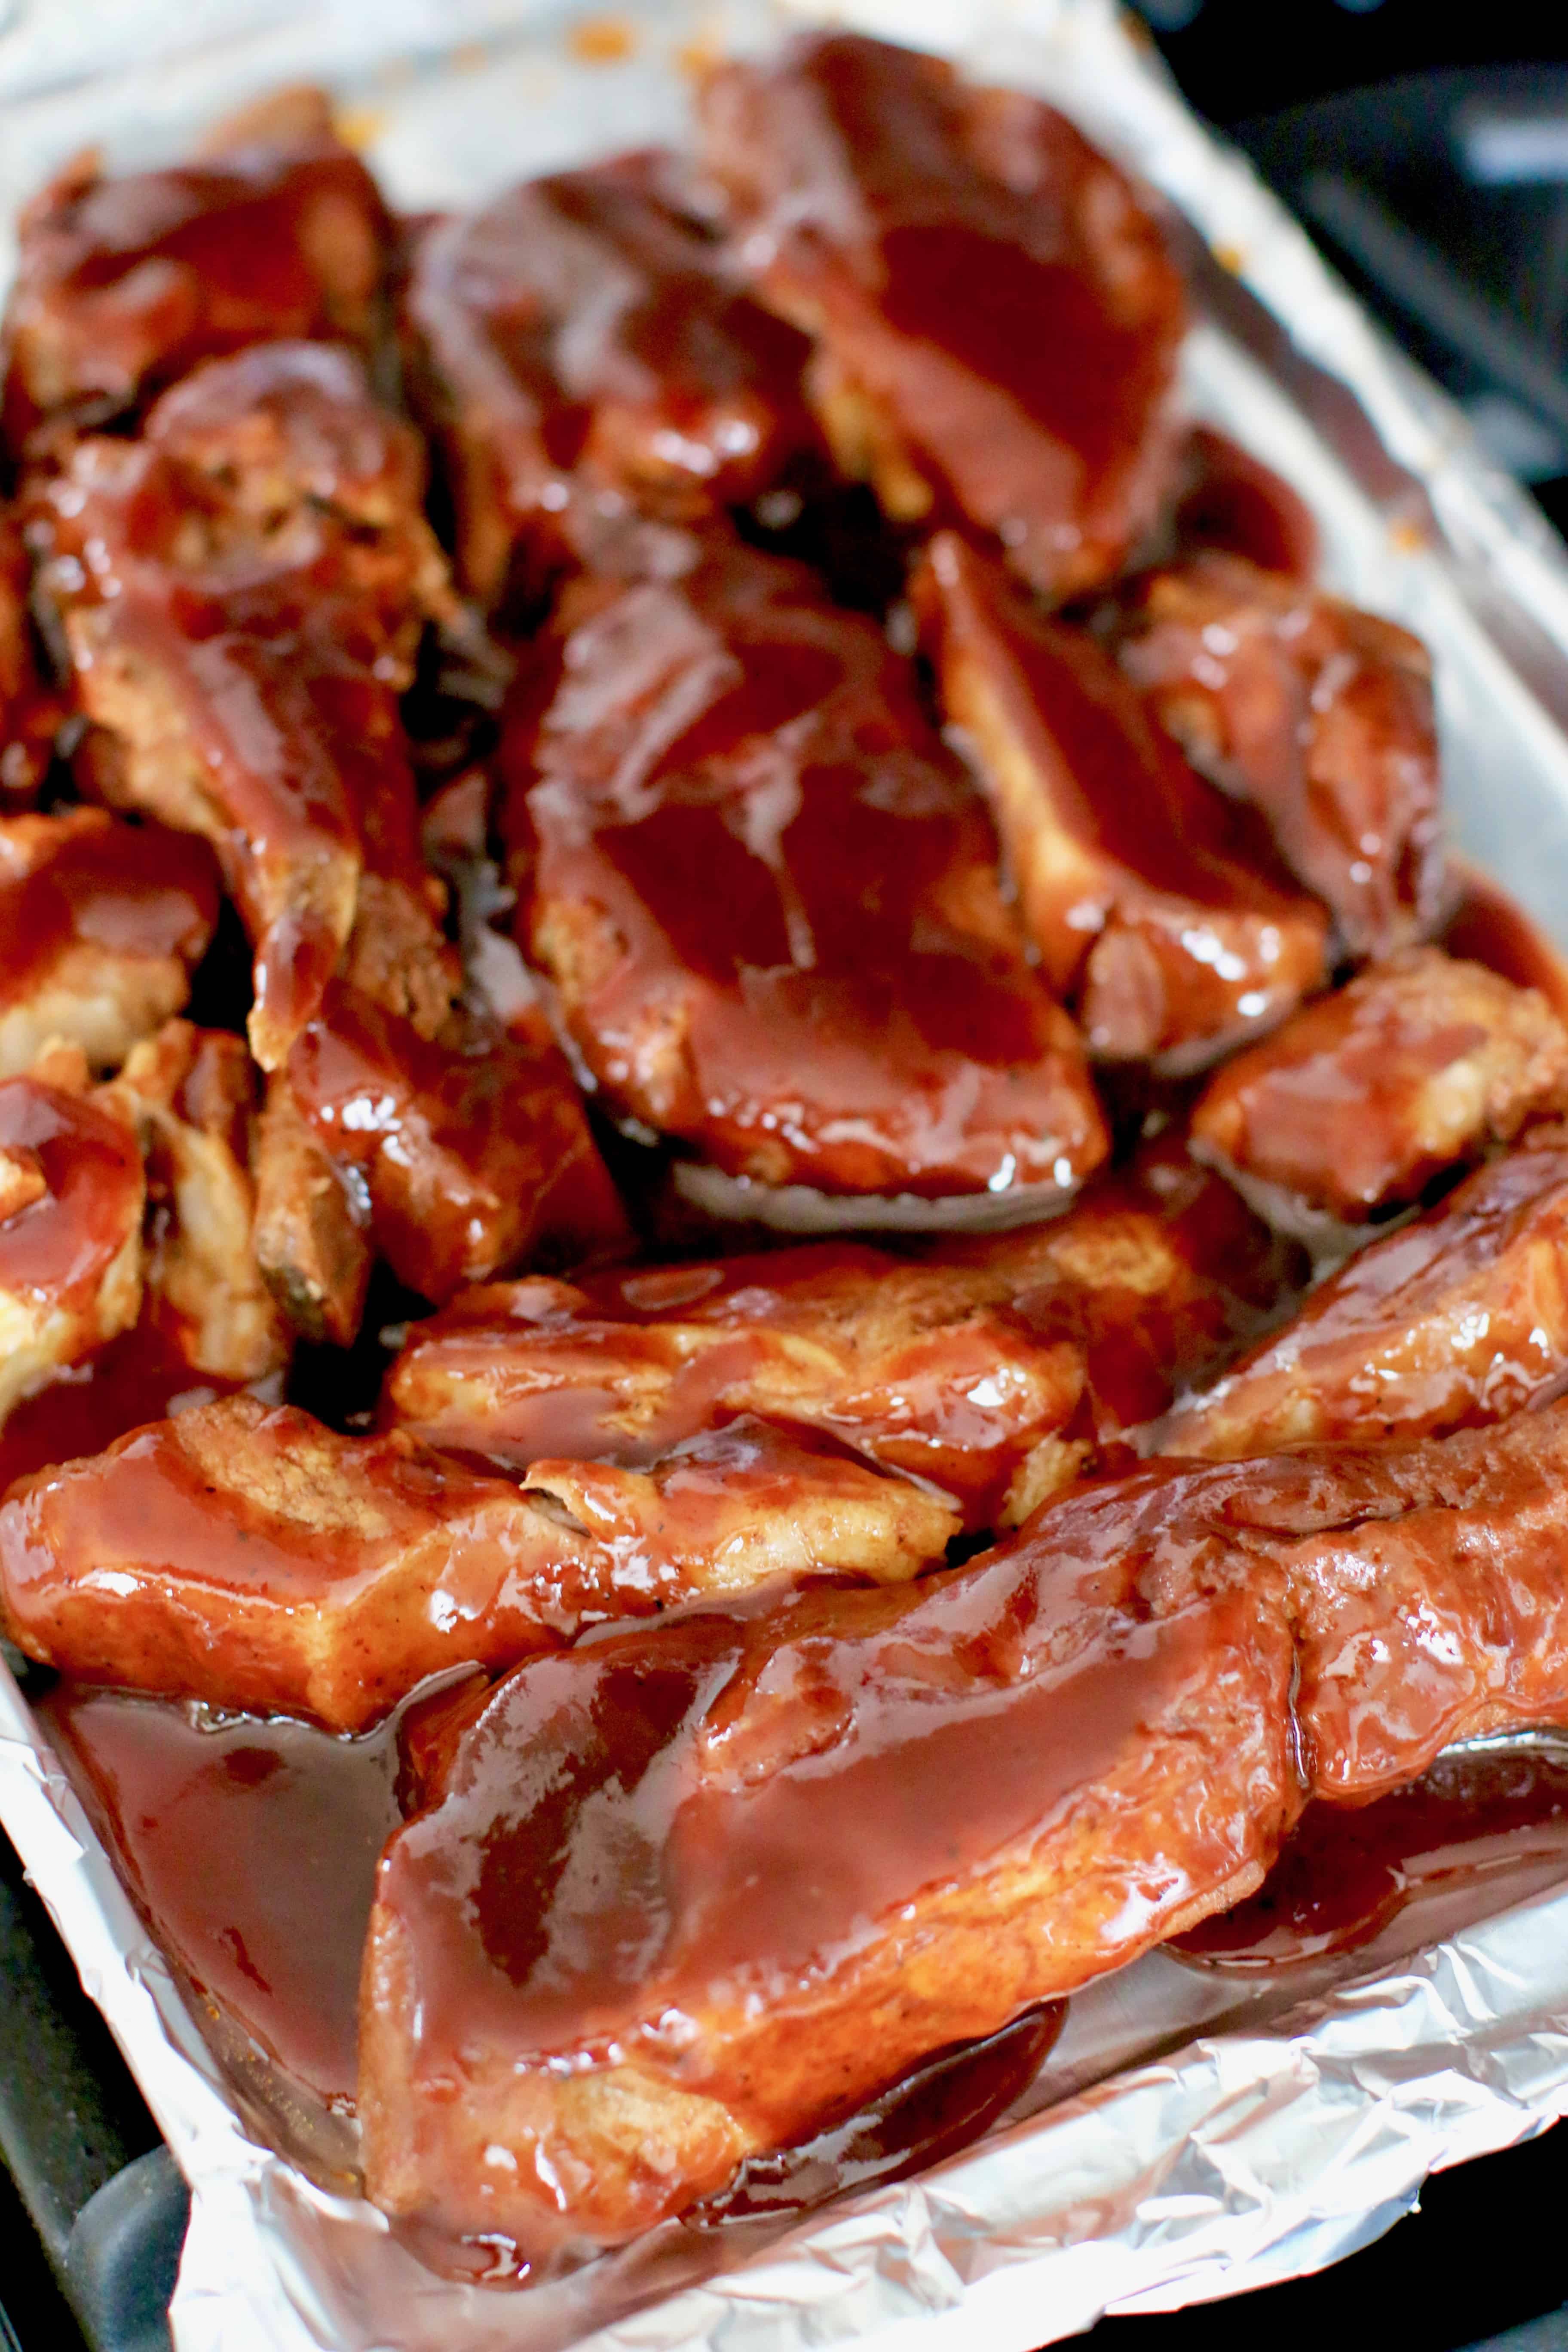 Korean BBQ sauce poured over cooked country style ribs on a baking sheet.